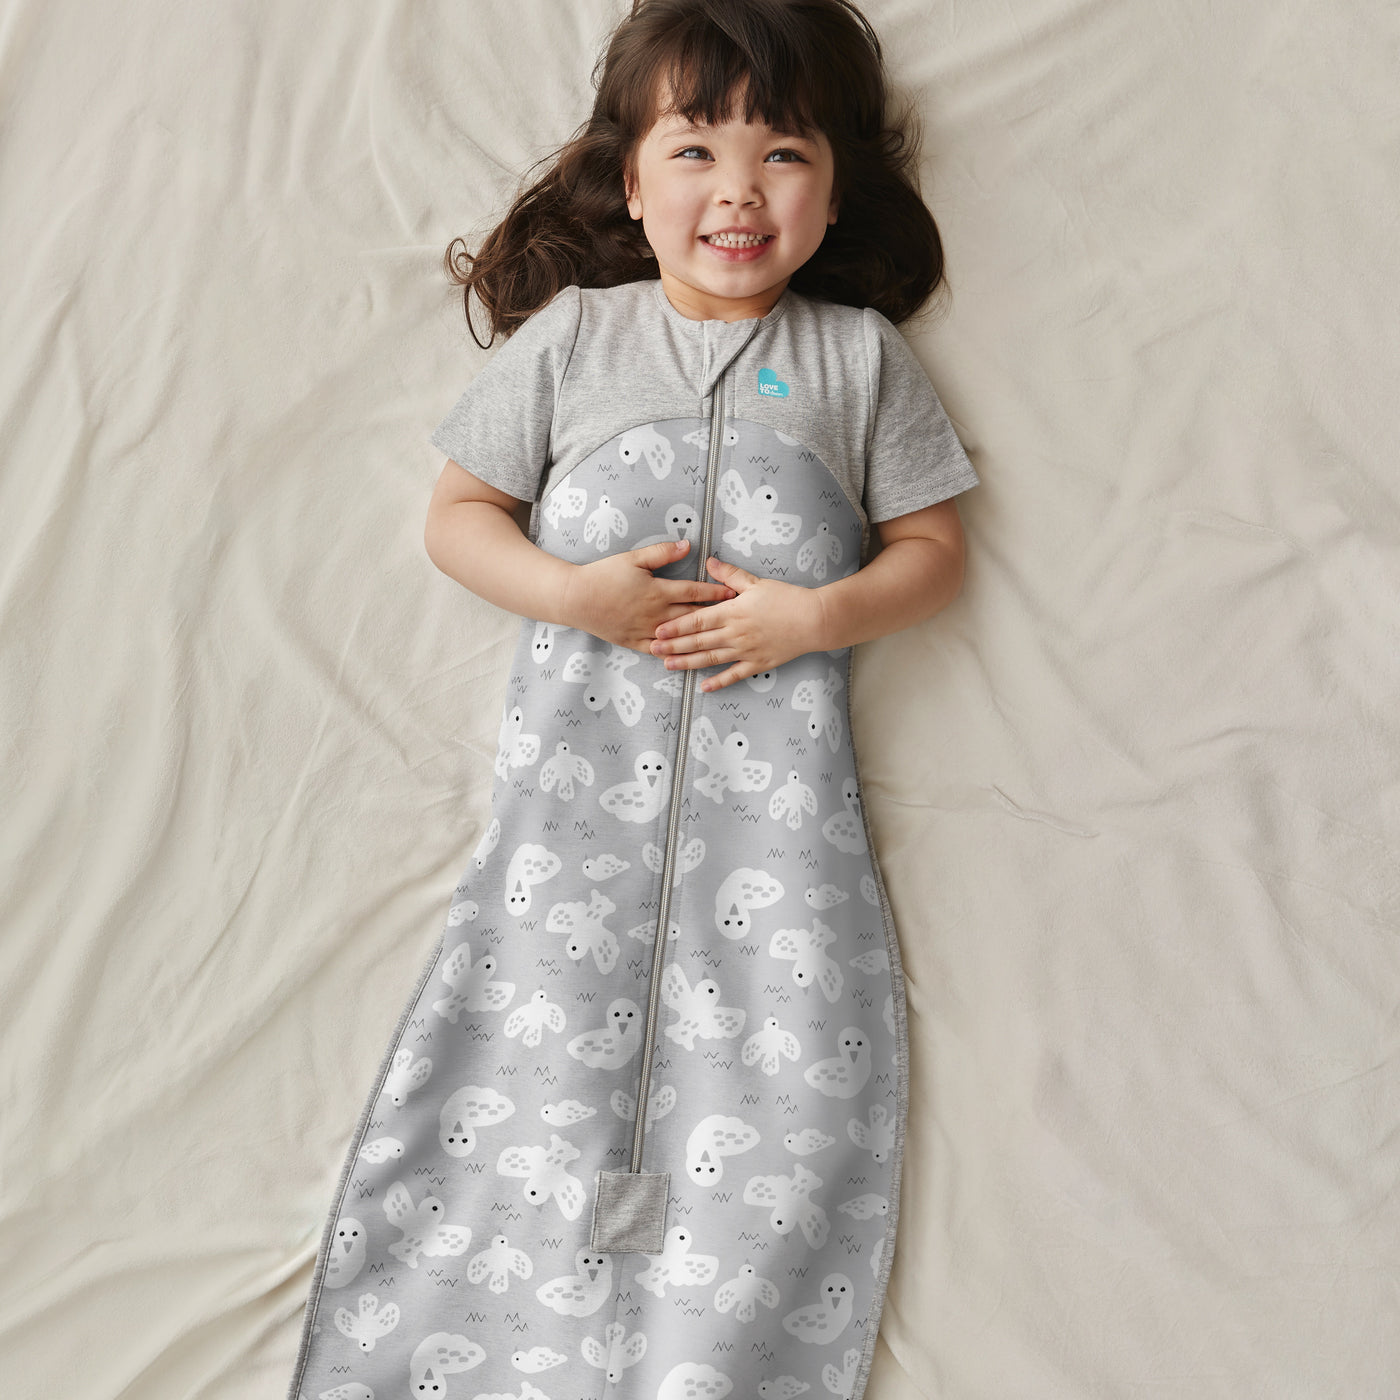 Our 1.0 TOG Organic Love to Dream Sleep Bag™ is an ultra-soft wearable blanket – designed to eliminate the need for loose blankets in the cot & ensuring a more comfortable sleep, day or night. With 1.0 TOG fabric, it is perfect for all year use in moderate temperatures.